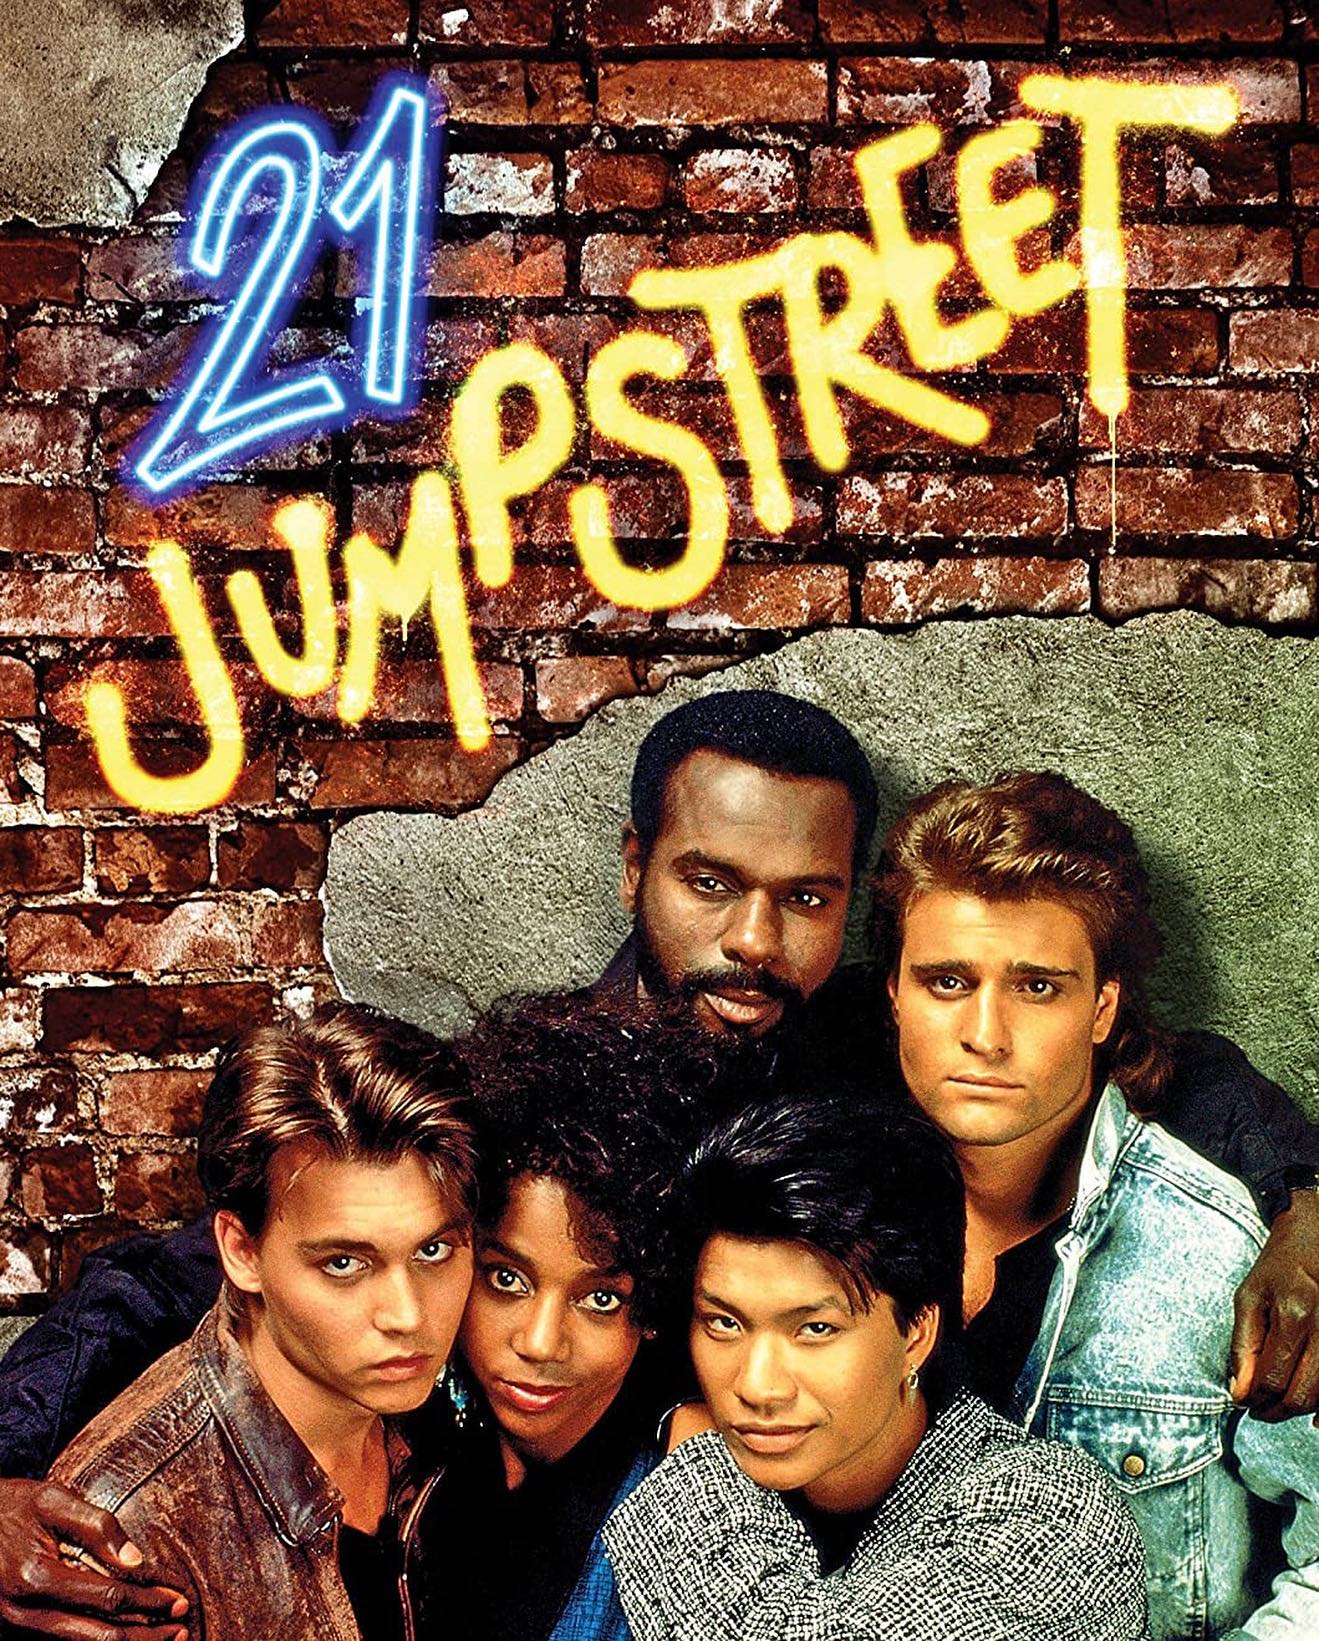 21 JUMP STREET made its television debut 35 years ago today! Created by Patrick Hasburgh and Stephen J. Cannell, the series centers around a squad of youthful-looking undercover police officers investigating crimes in high schools, colleges, and other teenage haunts. This iconic series starred Johnny Depp, Holly Robinson Peete, Dustin Nguyen, Steven Williams and Peter DeLuise. The series ultimately ran for 5 seasons for a total of 103 episodes and launched the spin-off series, BOOKER, starring Richard Greico. Fun Fact: Holly Robinson Peete sang the iconic theme song for the show. #21JumpStreet #television #JohnnyDepp #HollyRobinsonPeete #DustinNguyen #StevenWilliams #RichardGreico #copshows #undercovercops